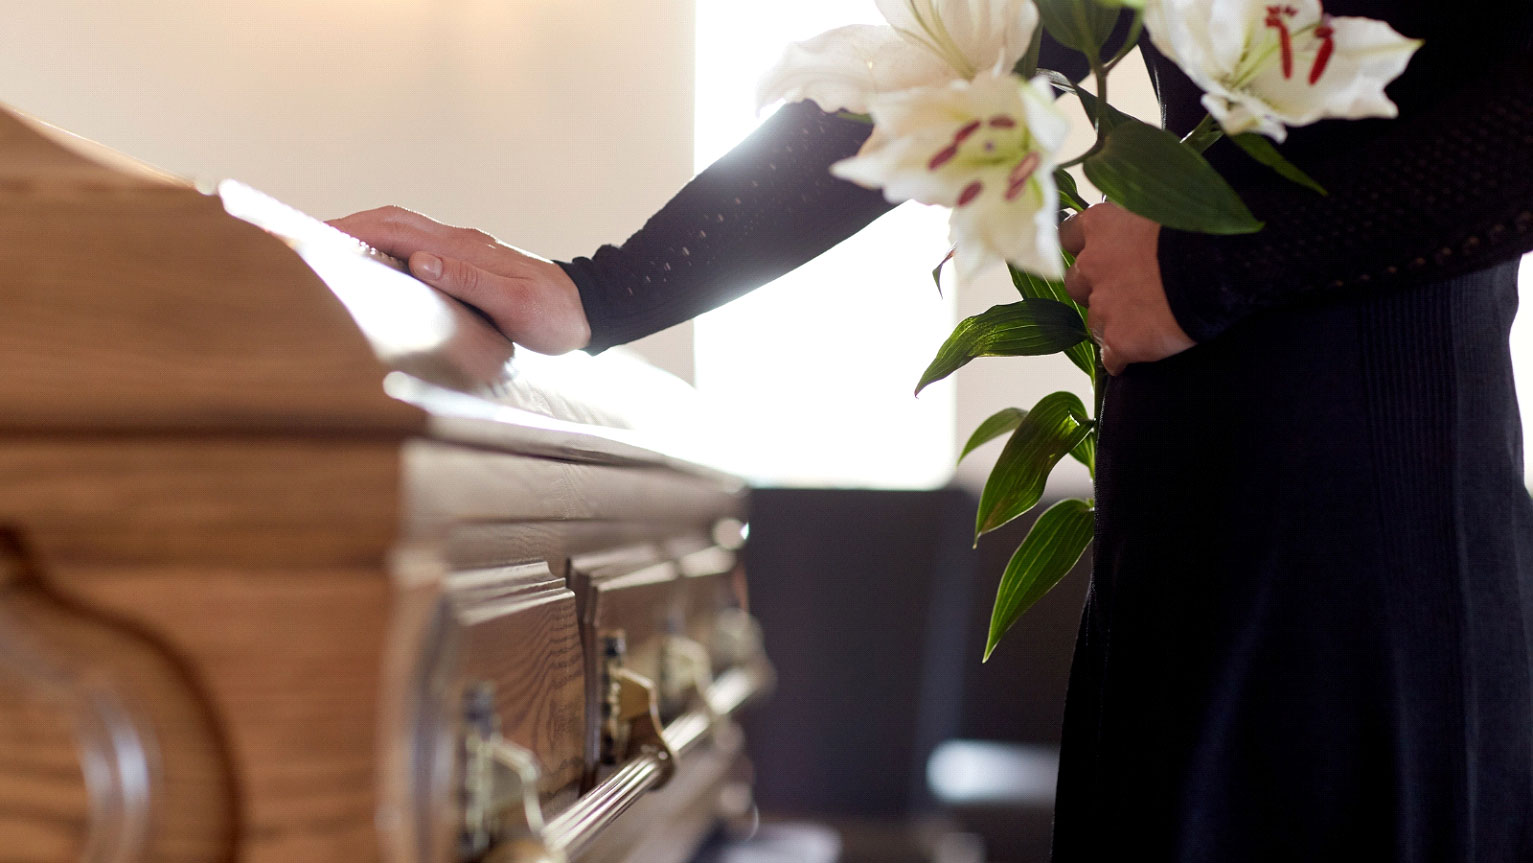 Can you file a wrongful death lawsuit if you lose an adult child in an accident